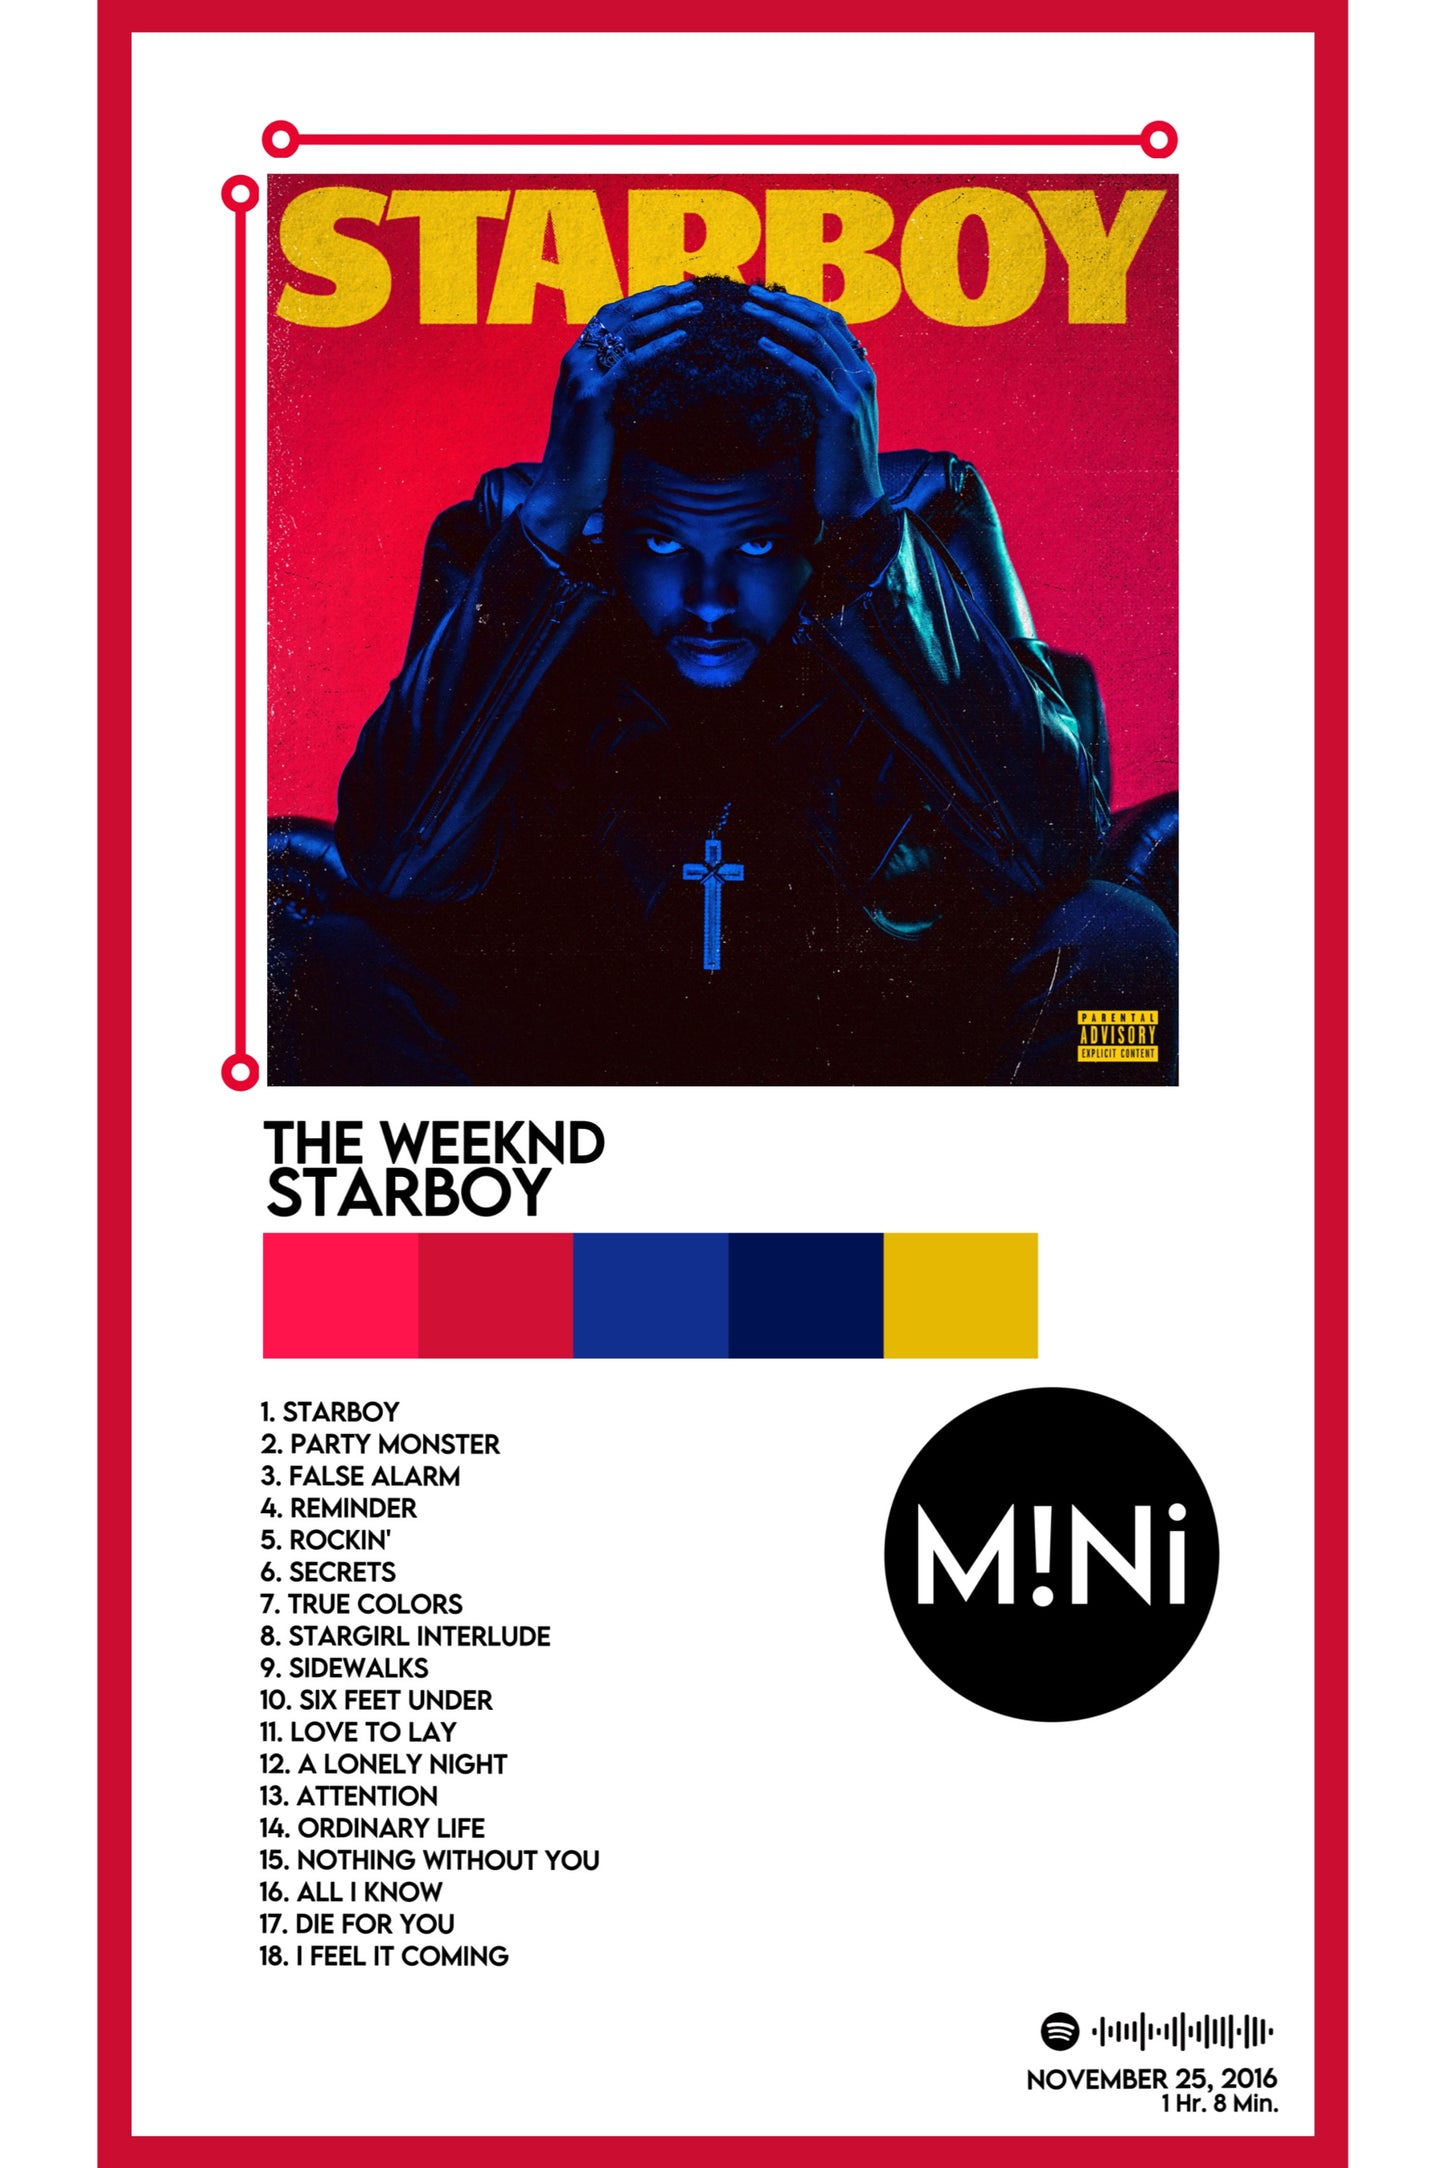 The Weeknd - 'Starboy' 12x18 Poster